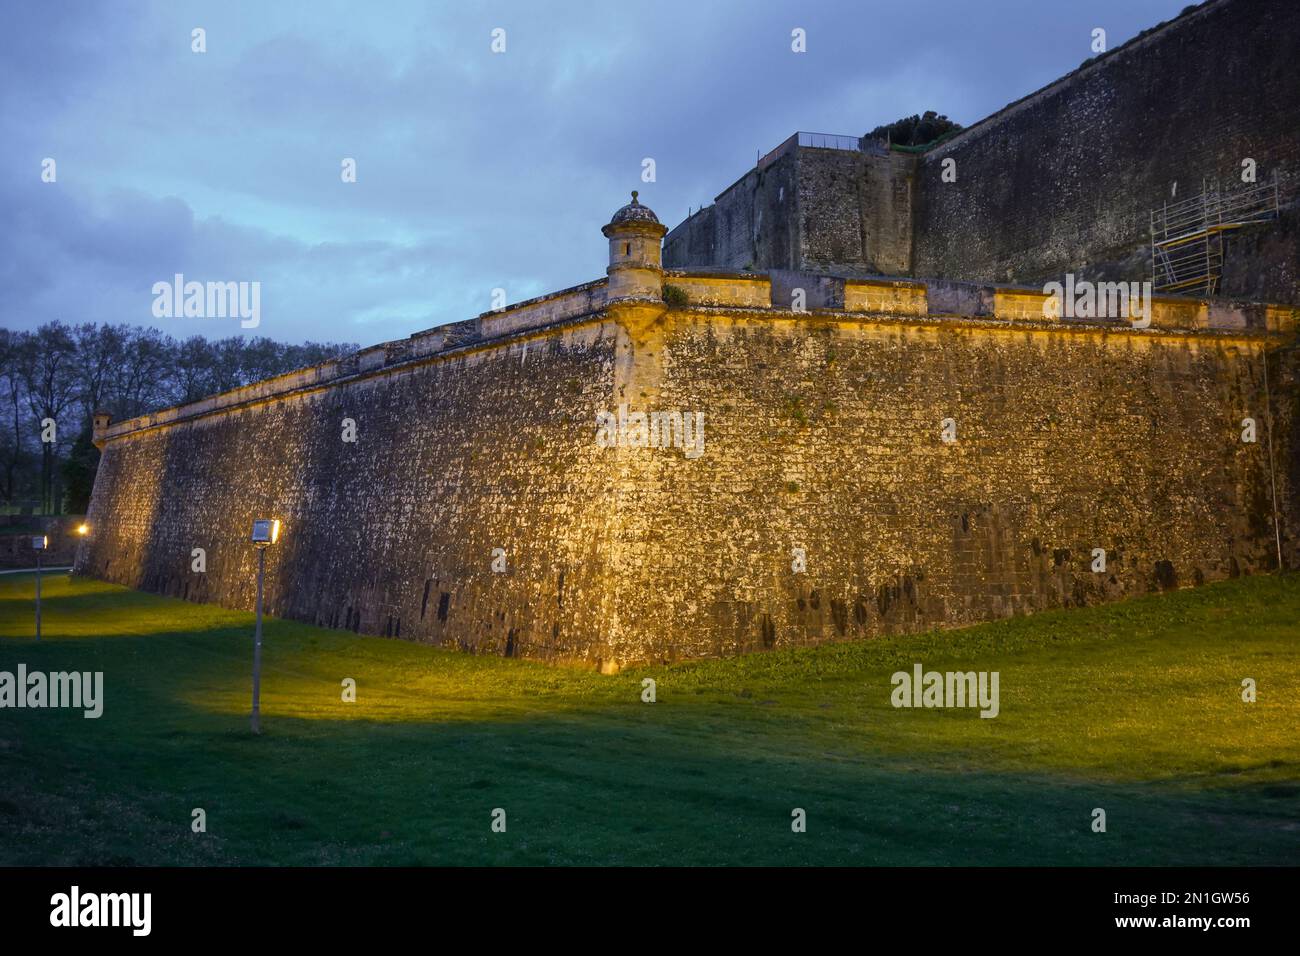 Old city walls and bulwarks of the grand fortified citadel, the star-shaped Ciudadela, Citadel of Pamplona, Pamplona, Navarre, Spain. Stock Photo